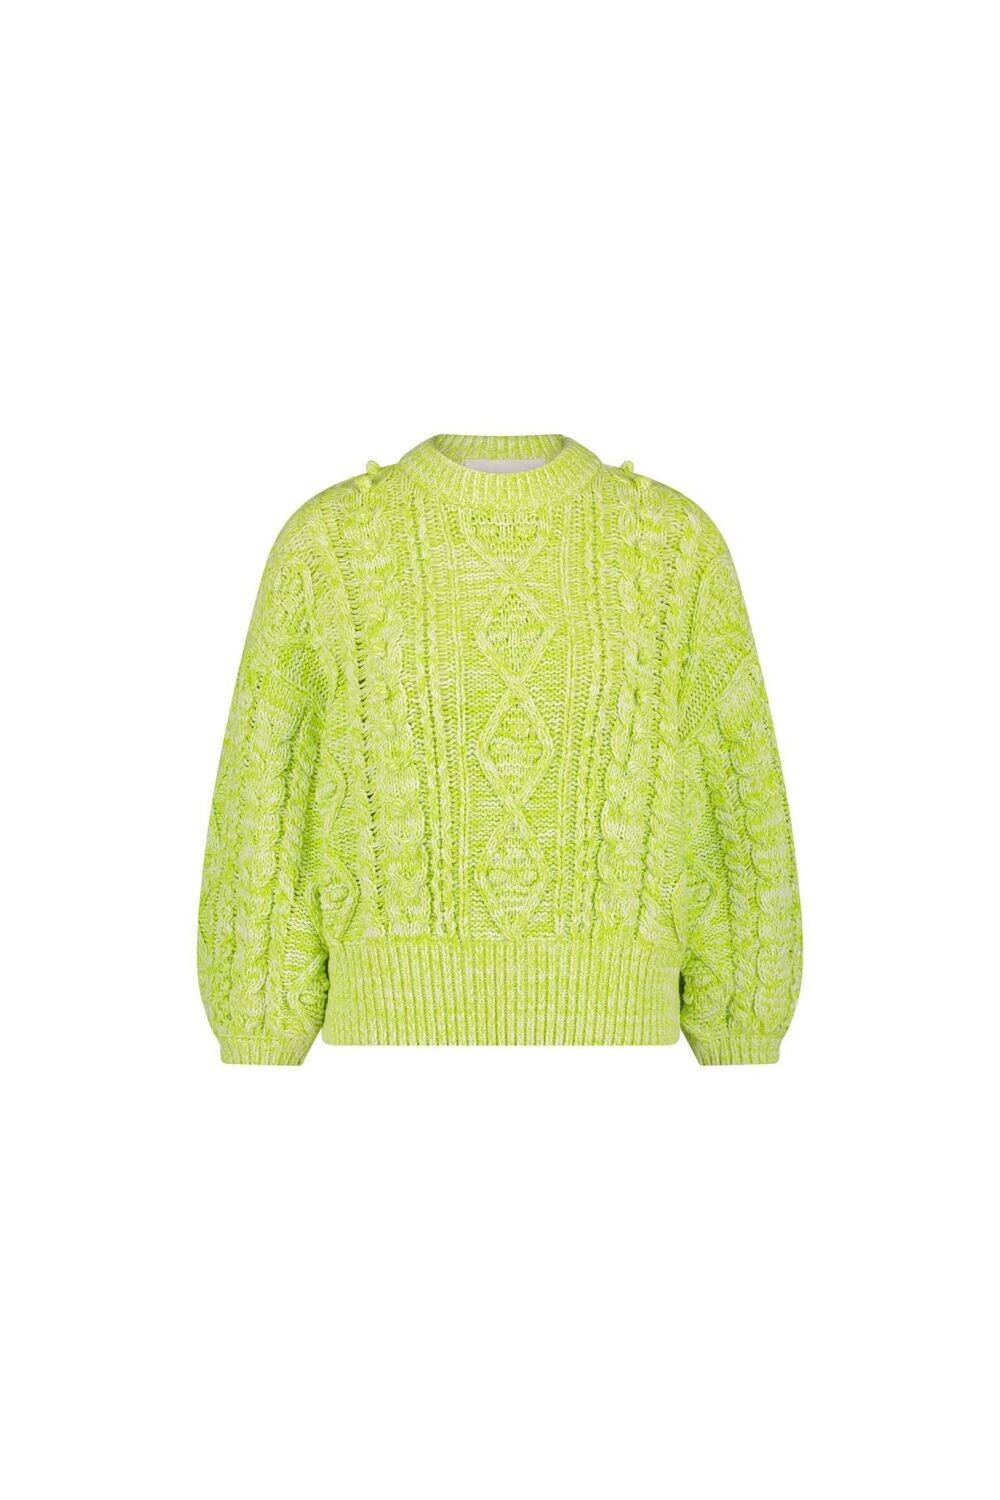 Fabienne Chapot Lovely Lime Suzy Pullover with 3/4 Sleeve